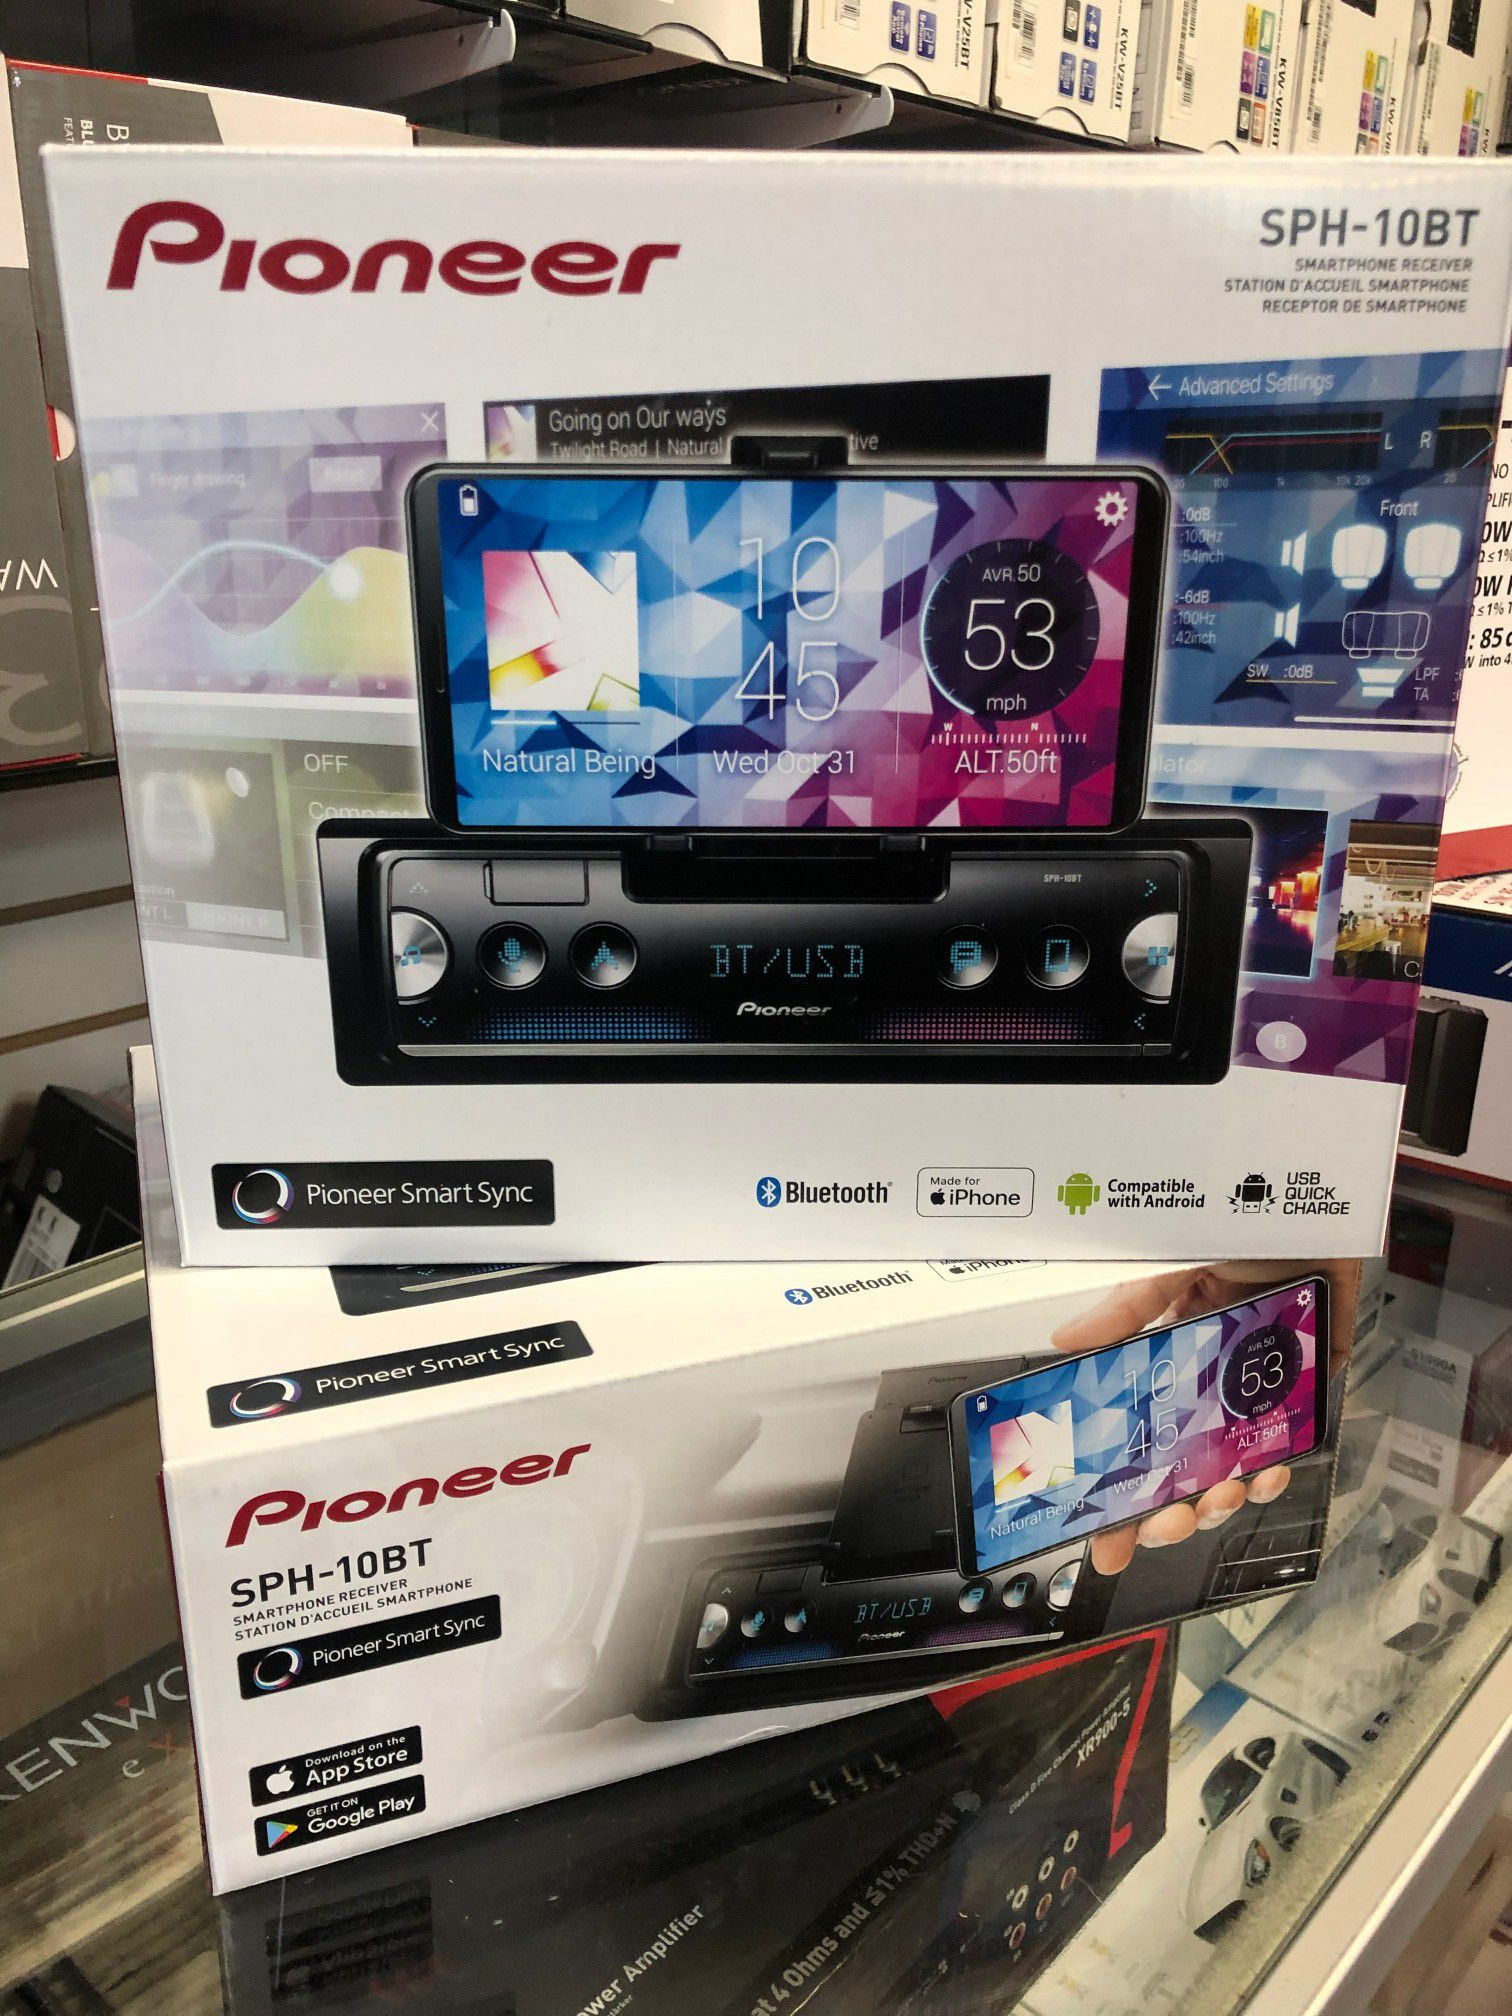 Pioneer sph-10bt in-dash stereo smartphone receiver for both Android or Apple on sale today for only 139